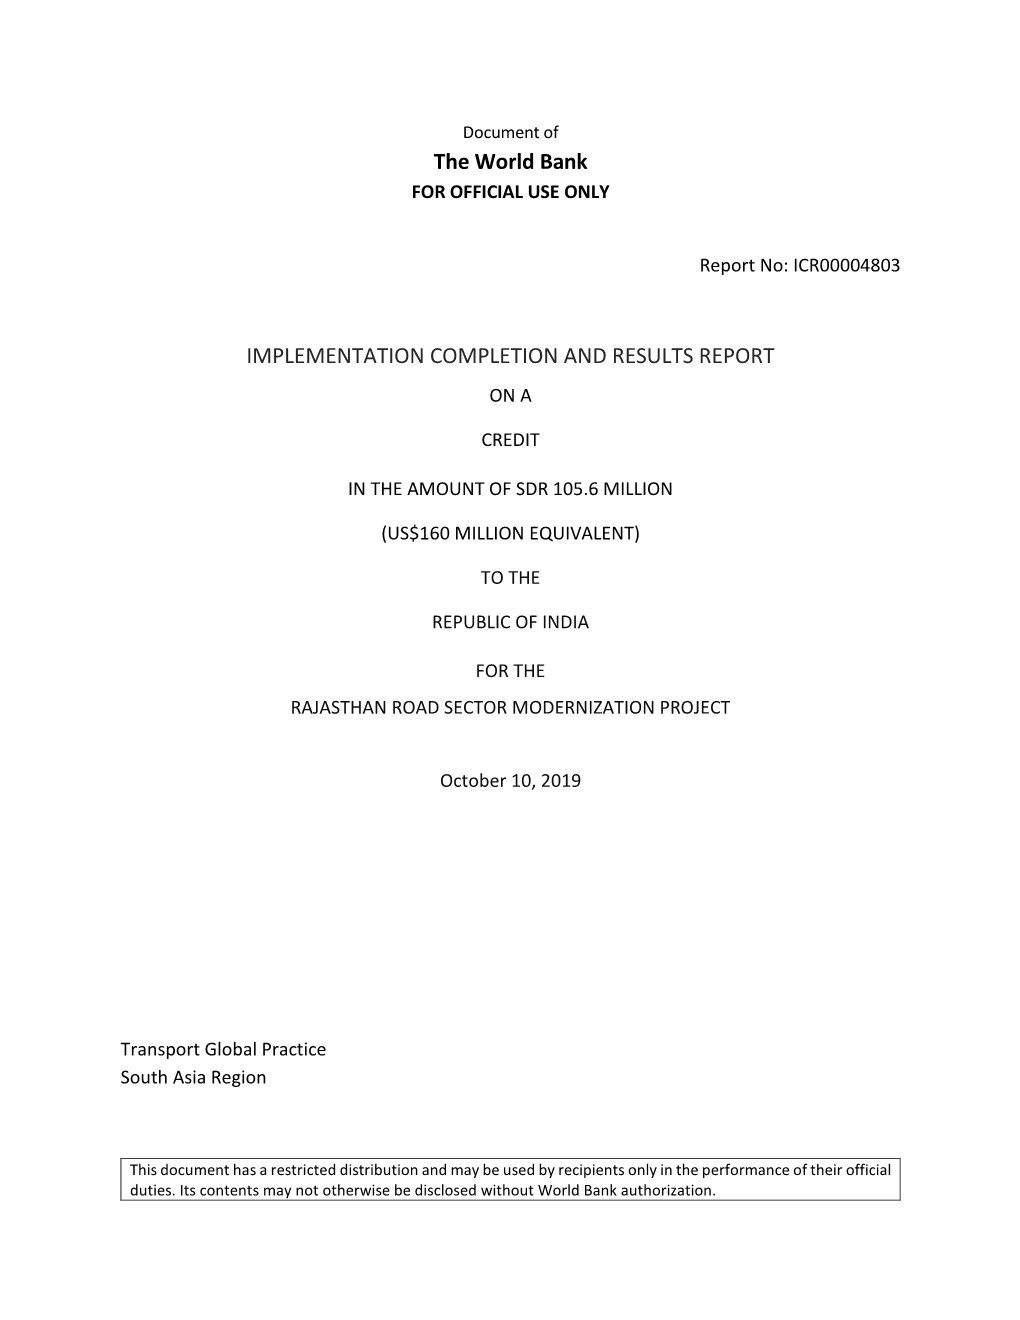 Implementation Completion and Results Report (ICR)